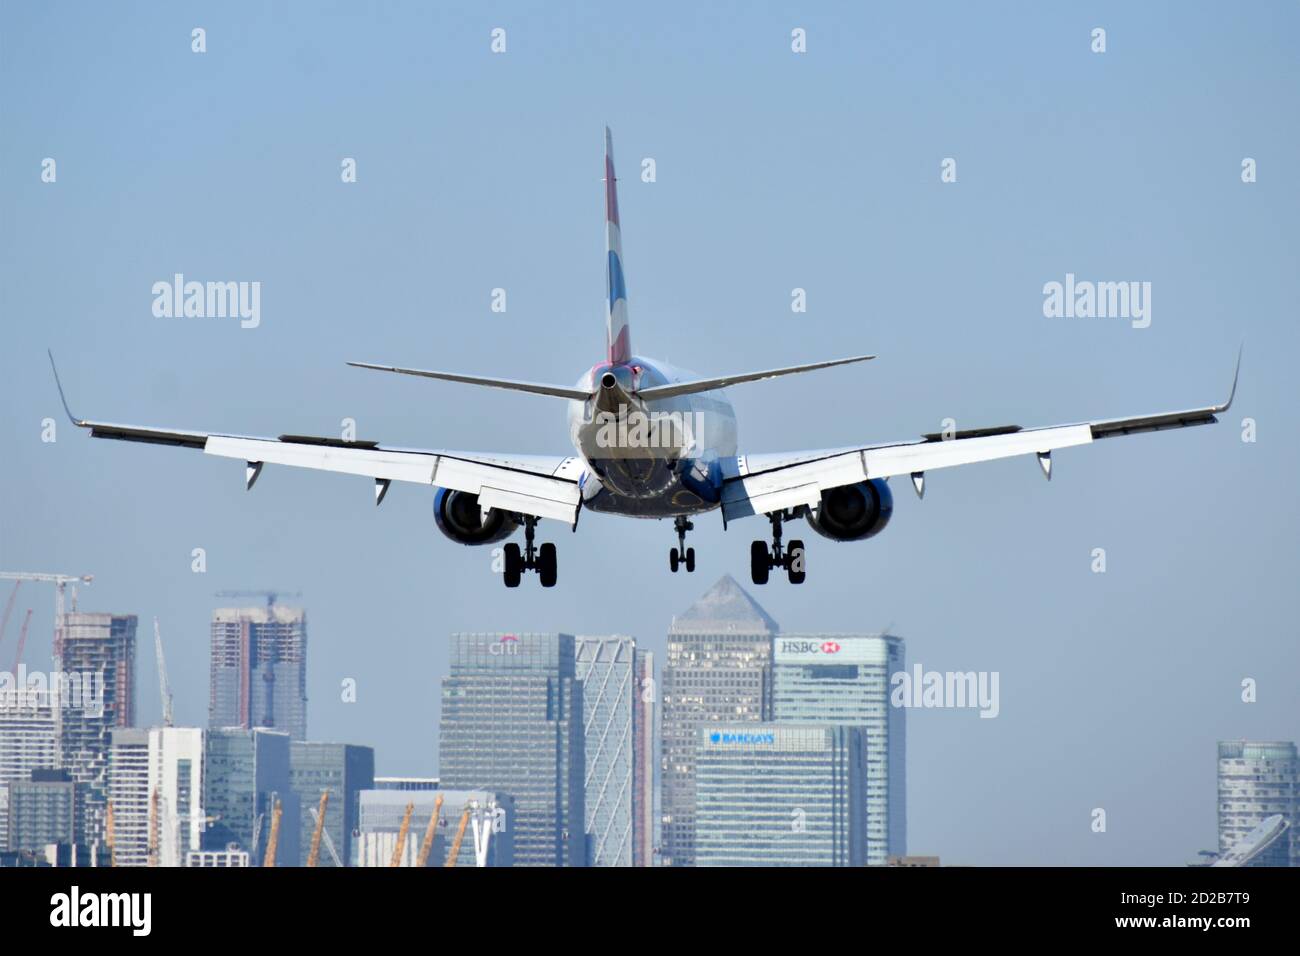 British Airways  airplane landing East London City Airport with Canary Wharf modern urban skyline in London Docklands beyond Newham England UK Stock Photo